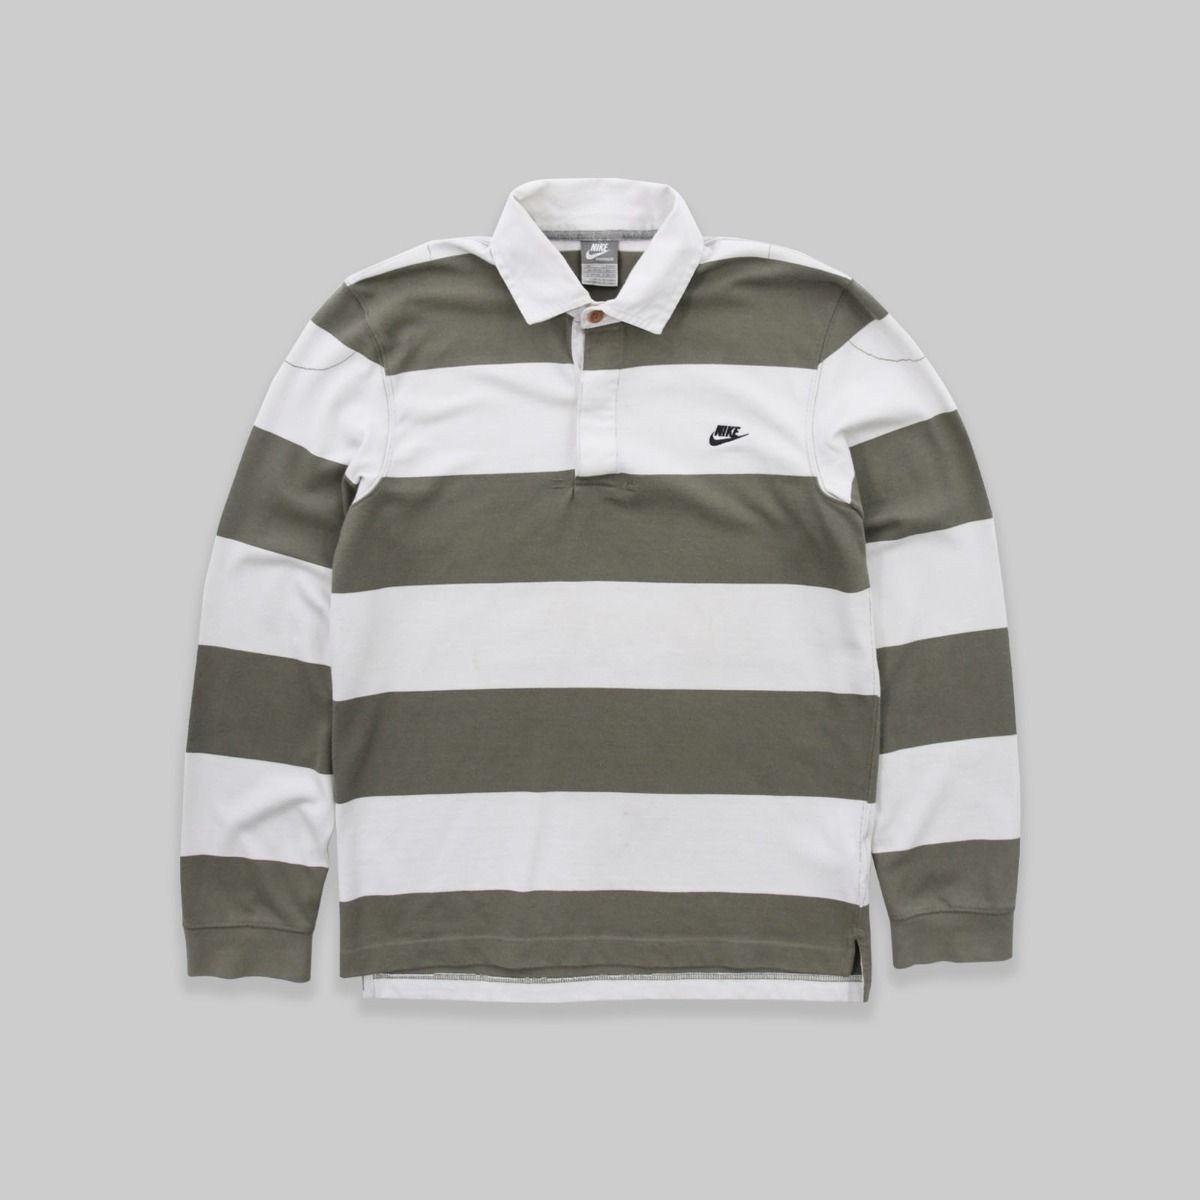 Nike Early 2000s Rugby Brown Shirt